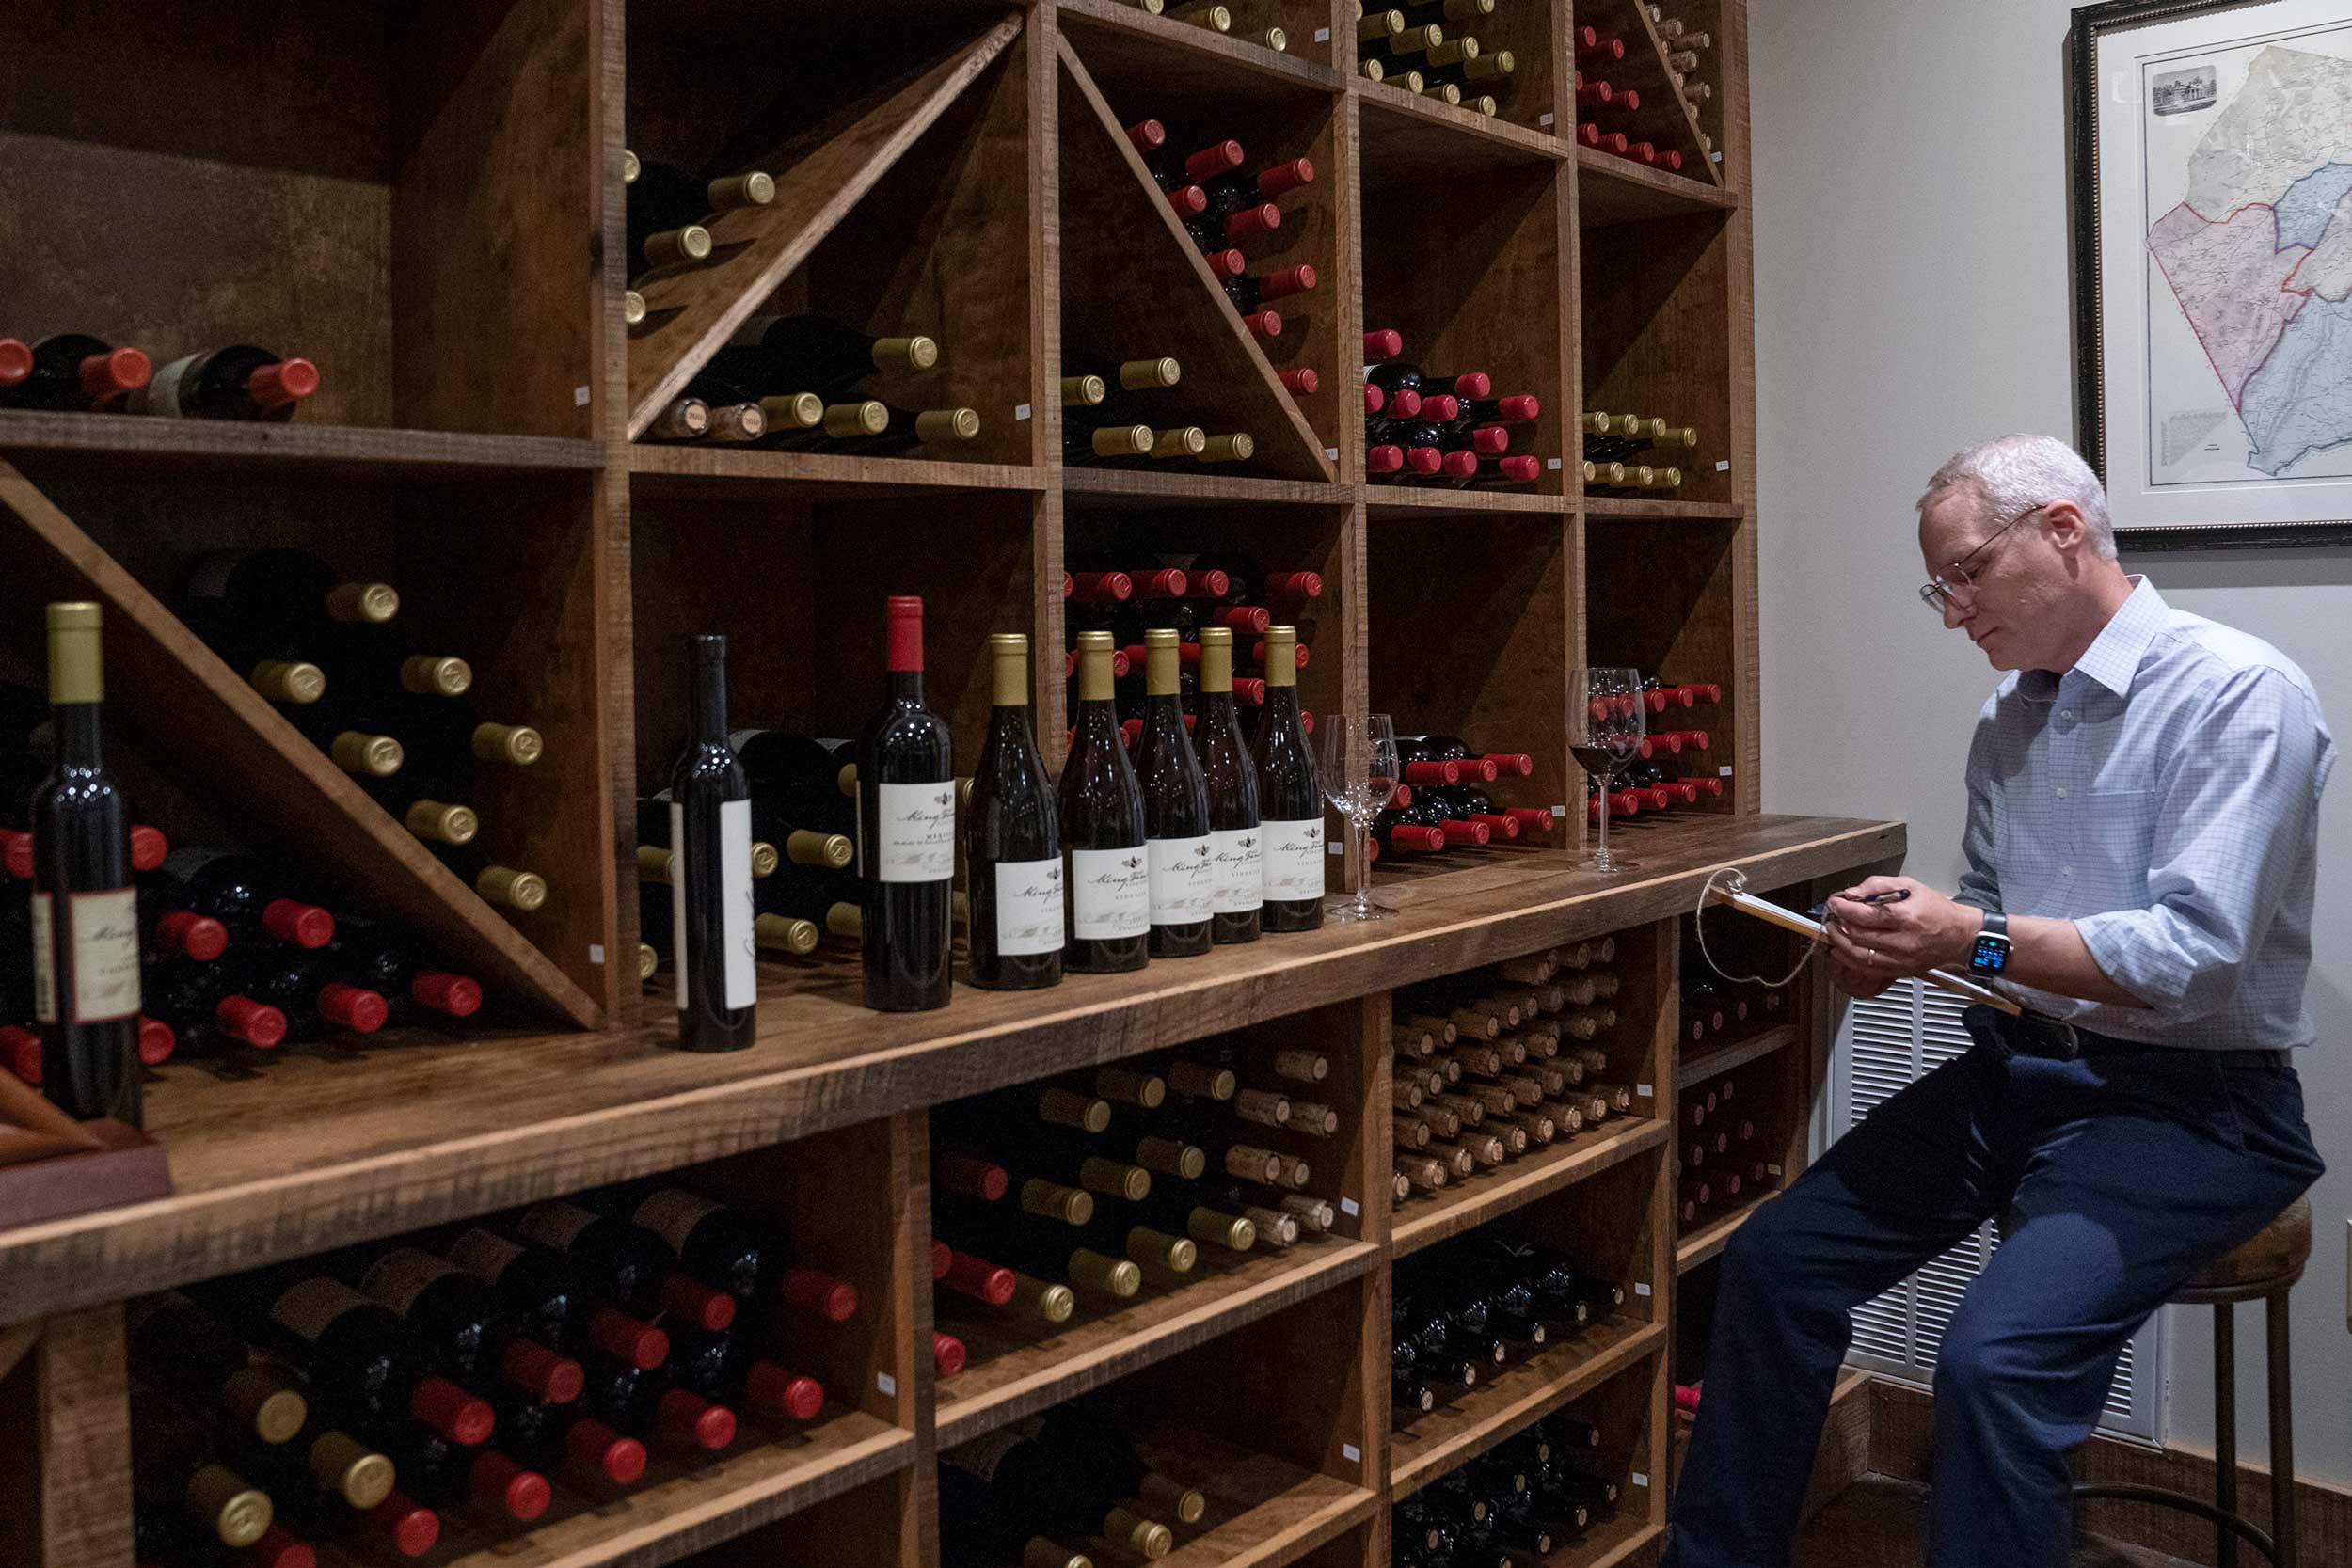 Rodney Sullivan sitting on a chair reading a lable on a bottle of wine in a wine cellar